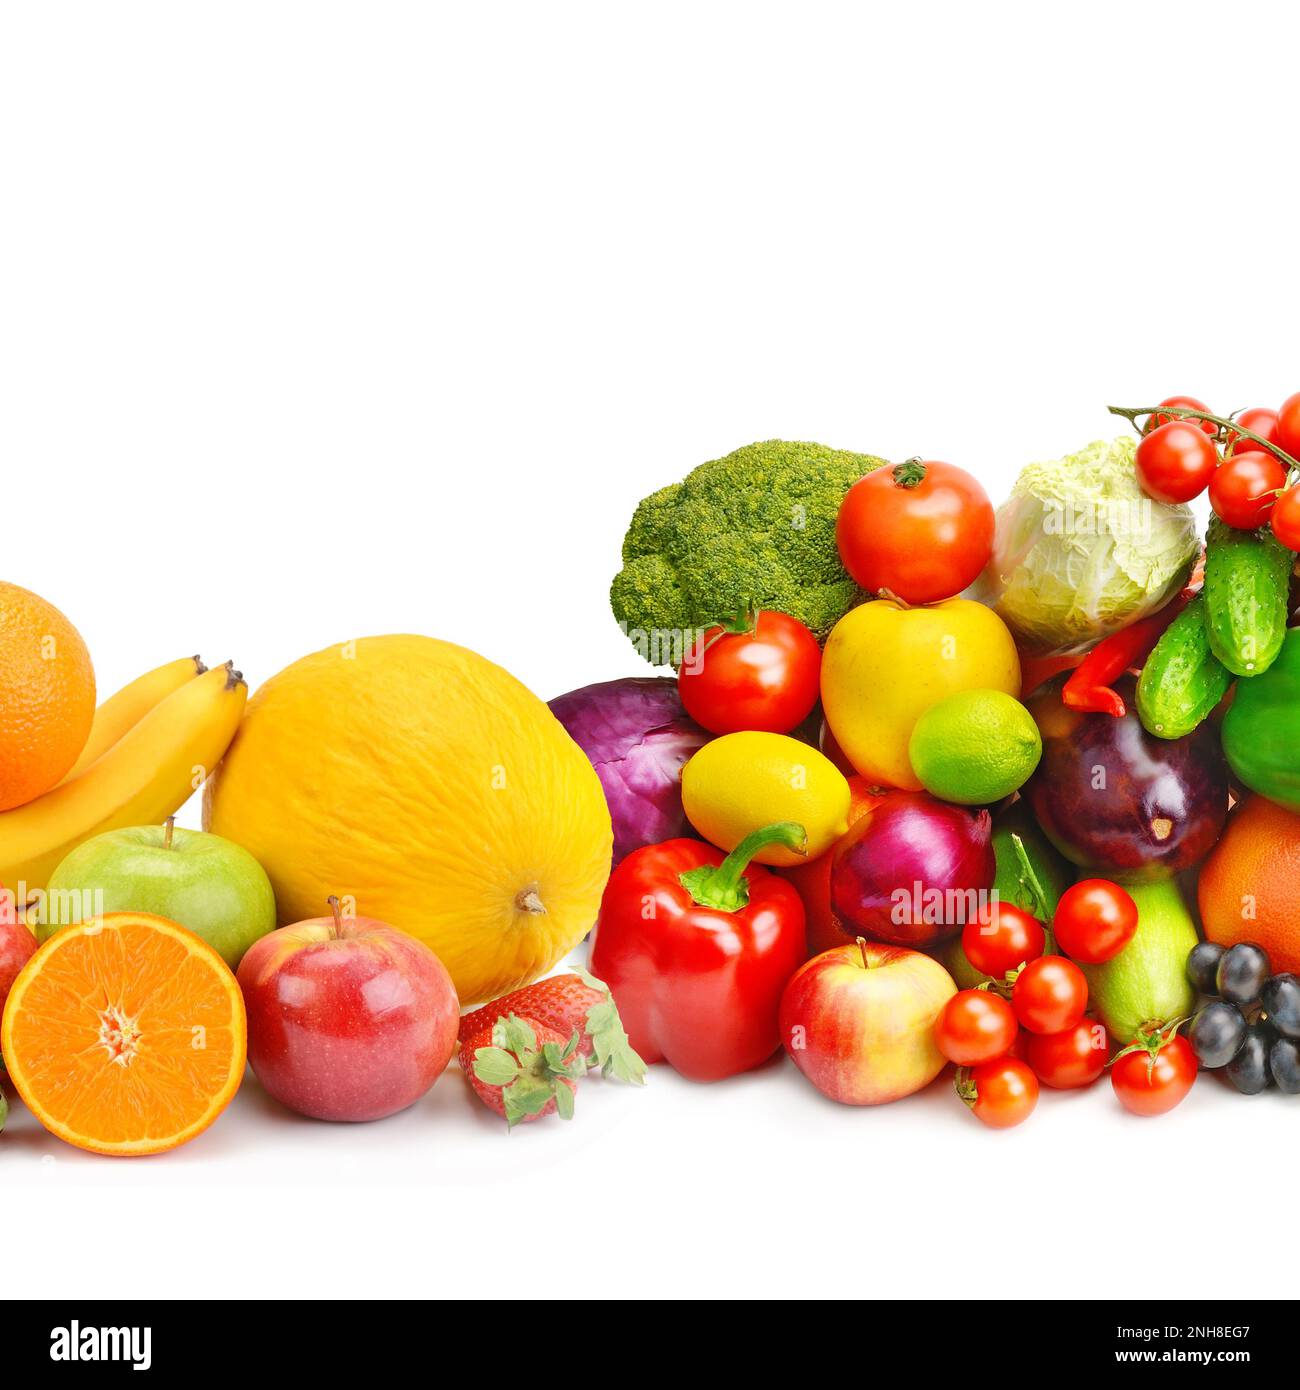 Vegetables and fruits isolated on white background. Collage. Free space for text. Stock Photo